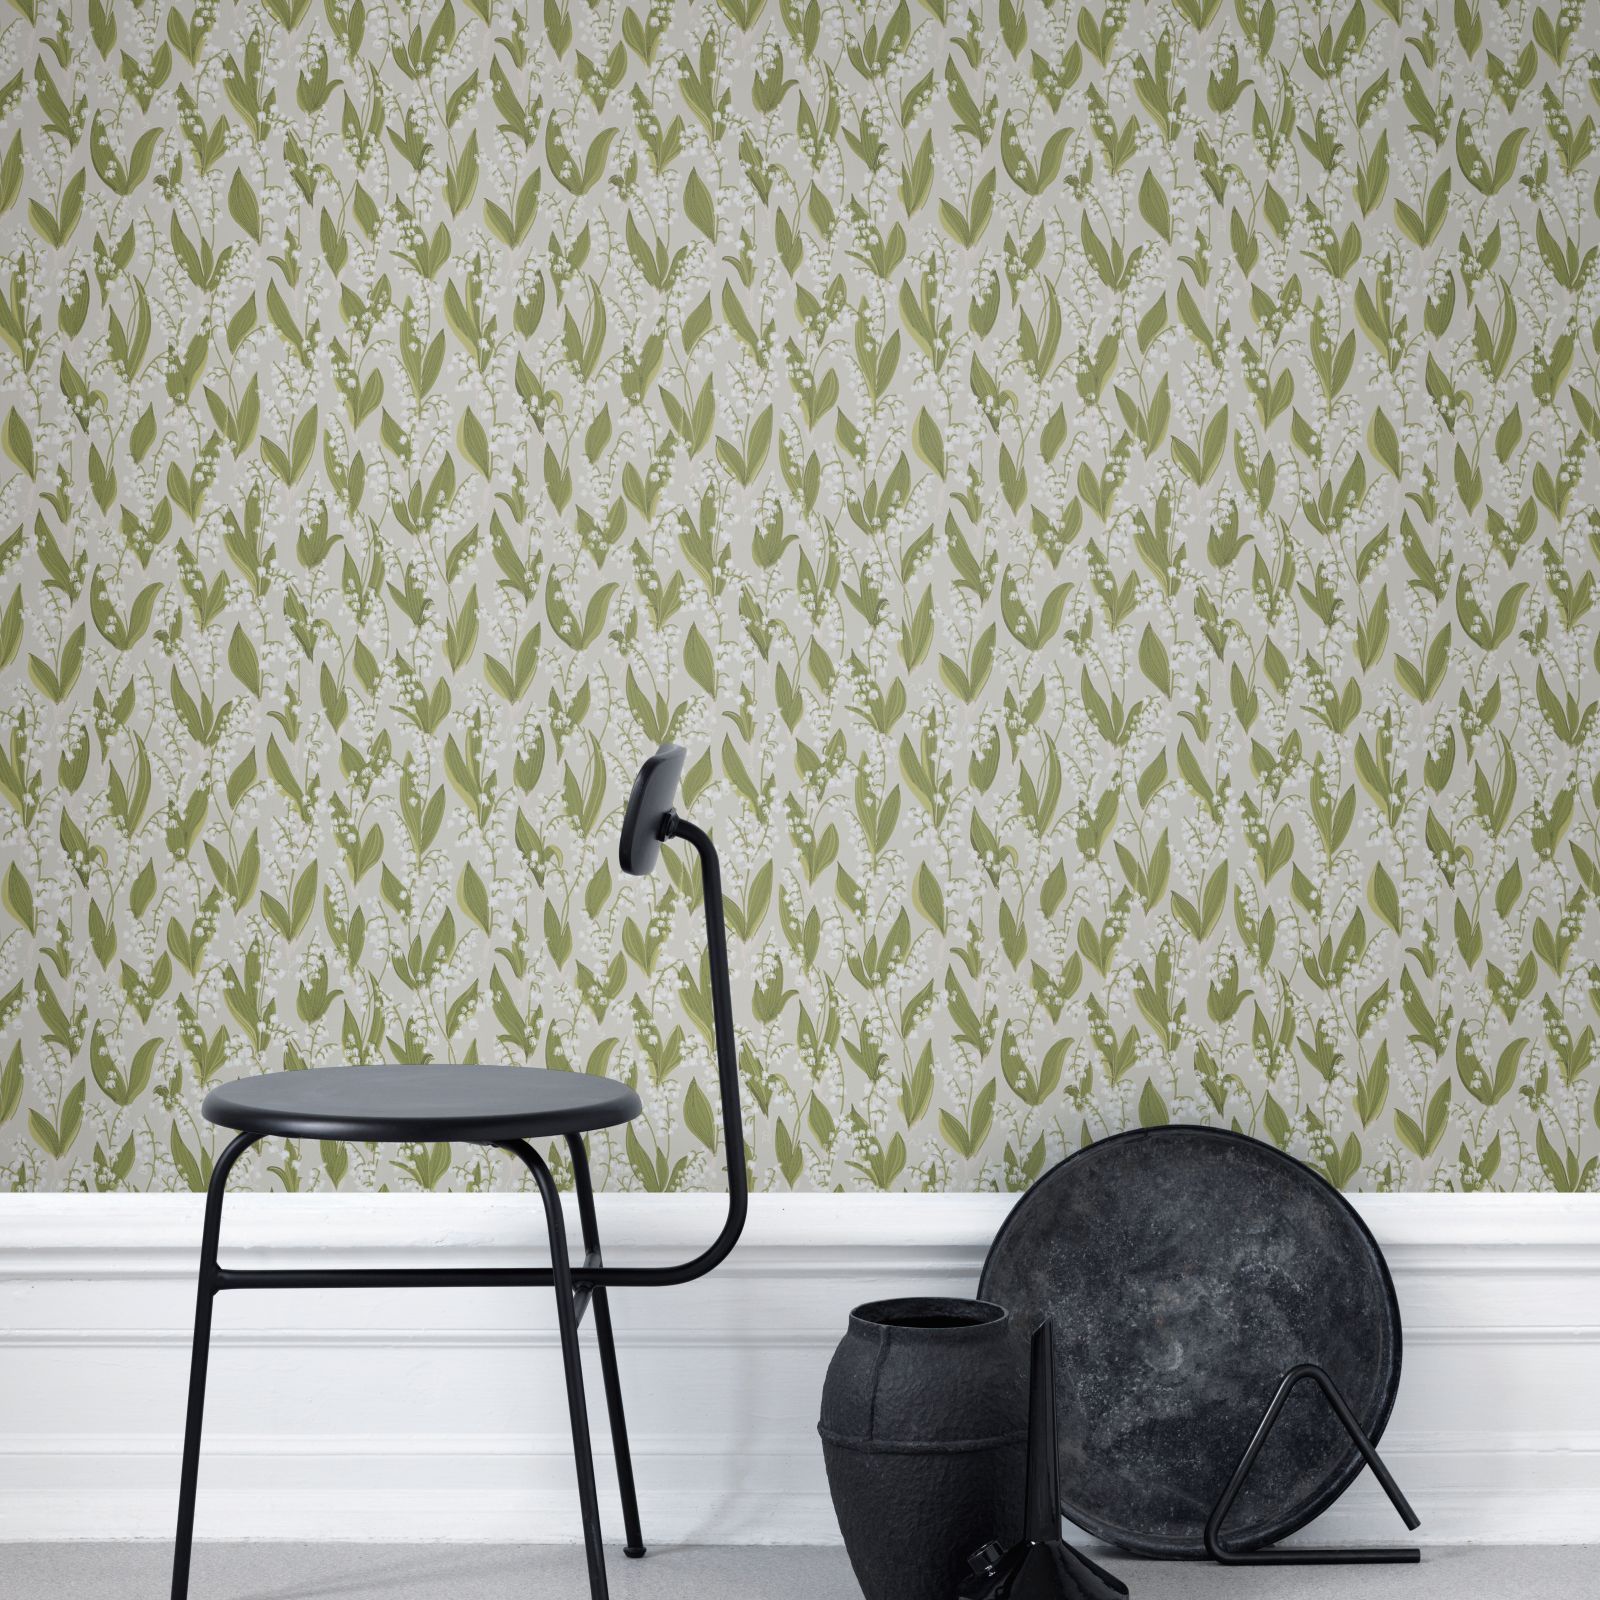 Lily of the valley wallpaper in a choice of 3 colourways